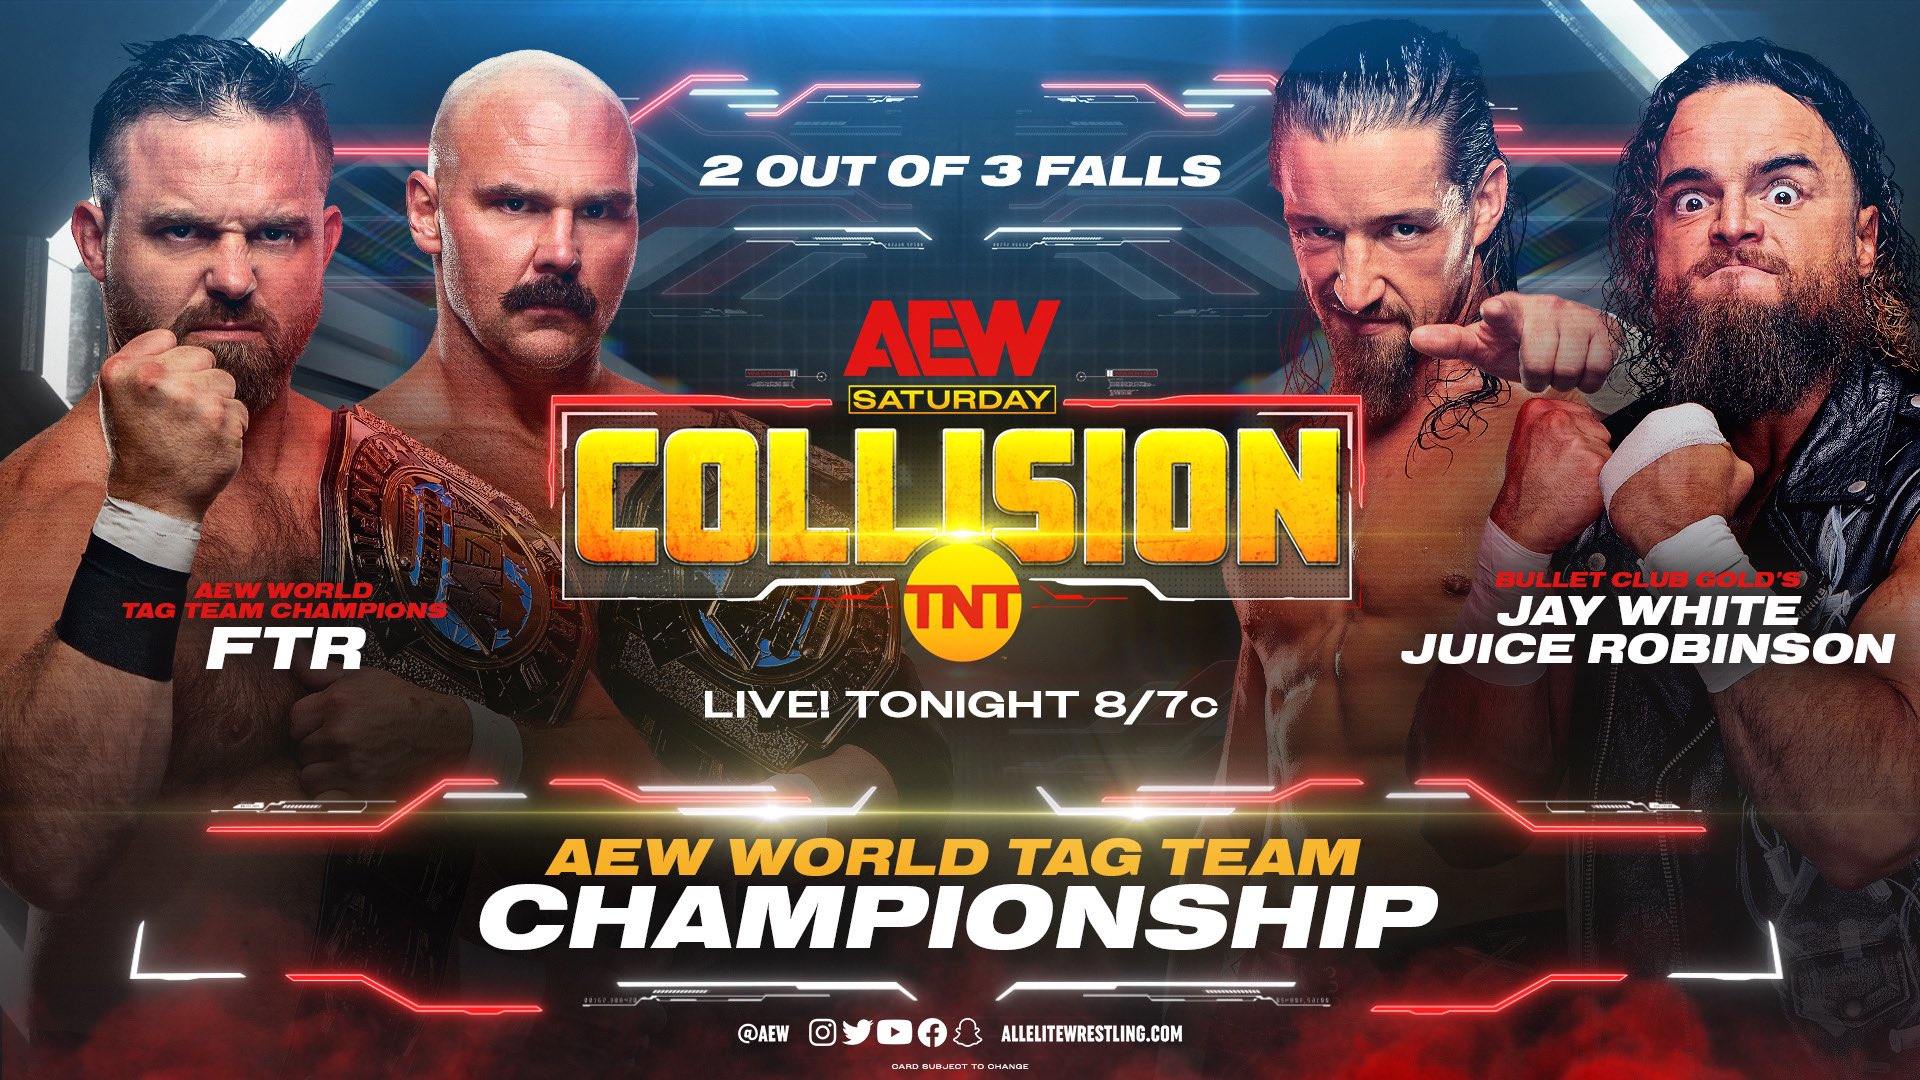 Backstage News On Who Produced The 2-Out-Of-3 Falls Match On AEW Collision